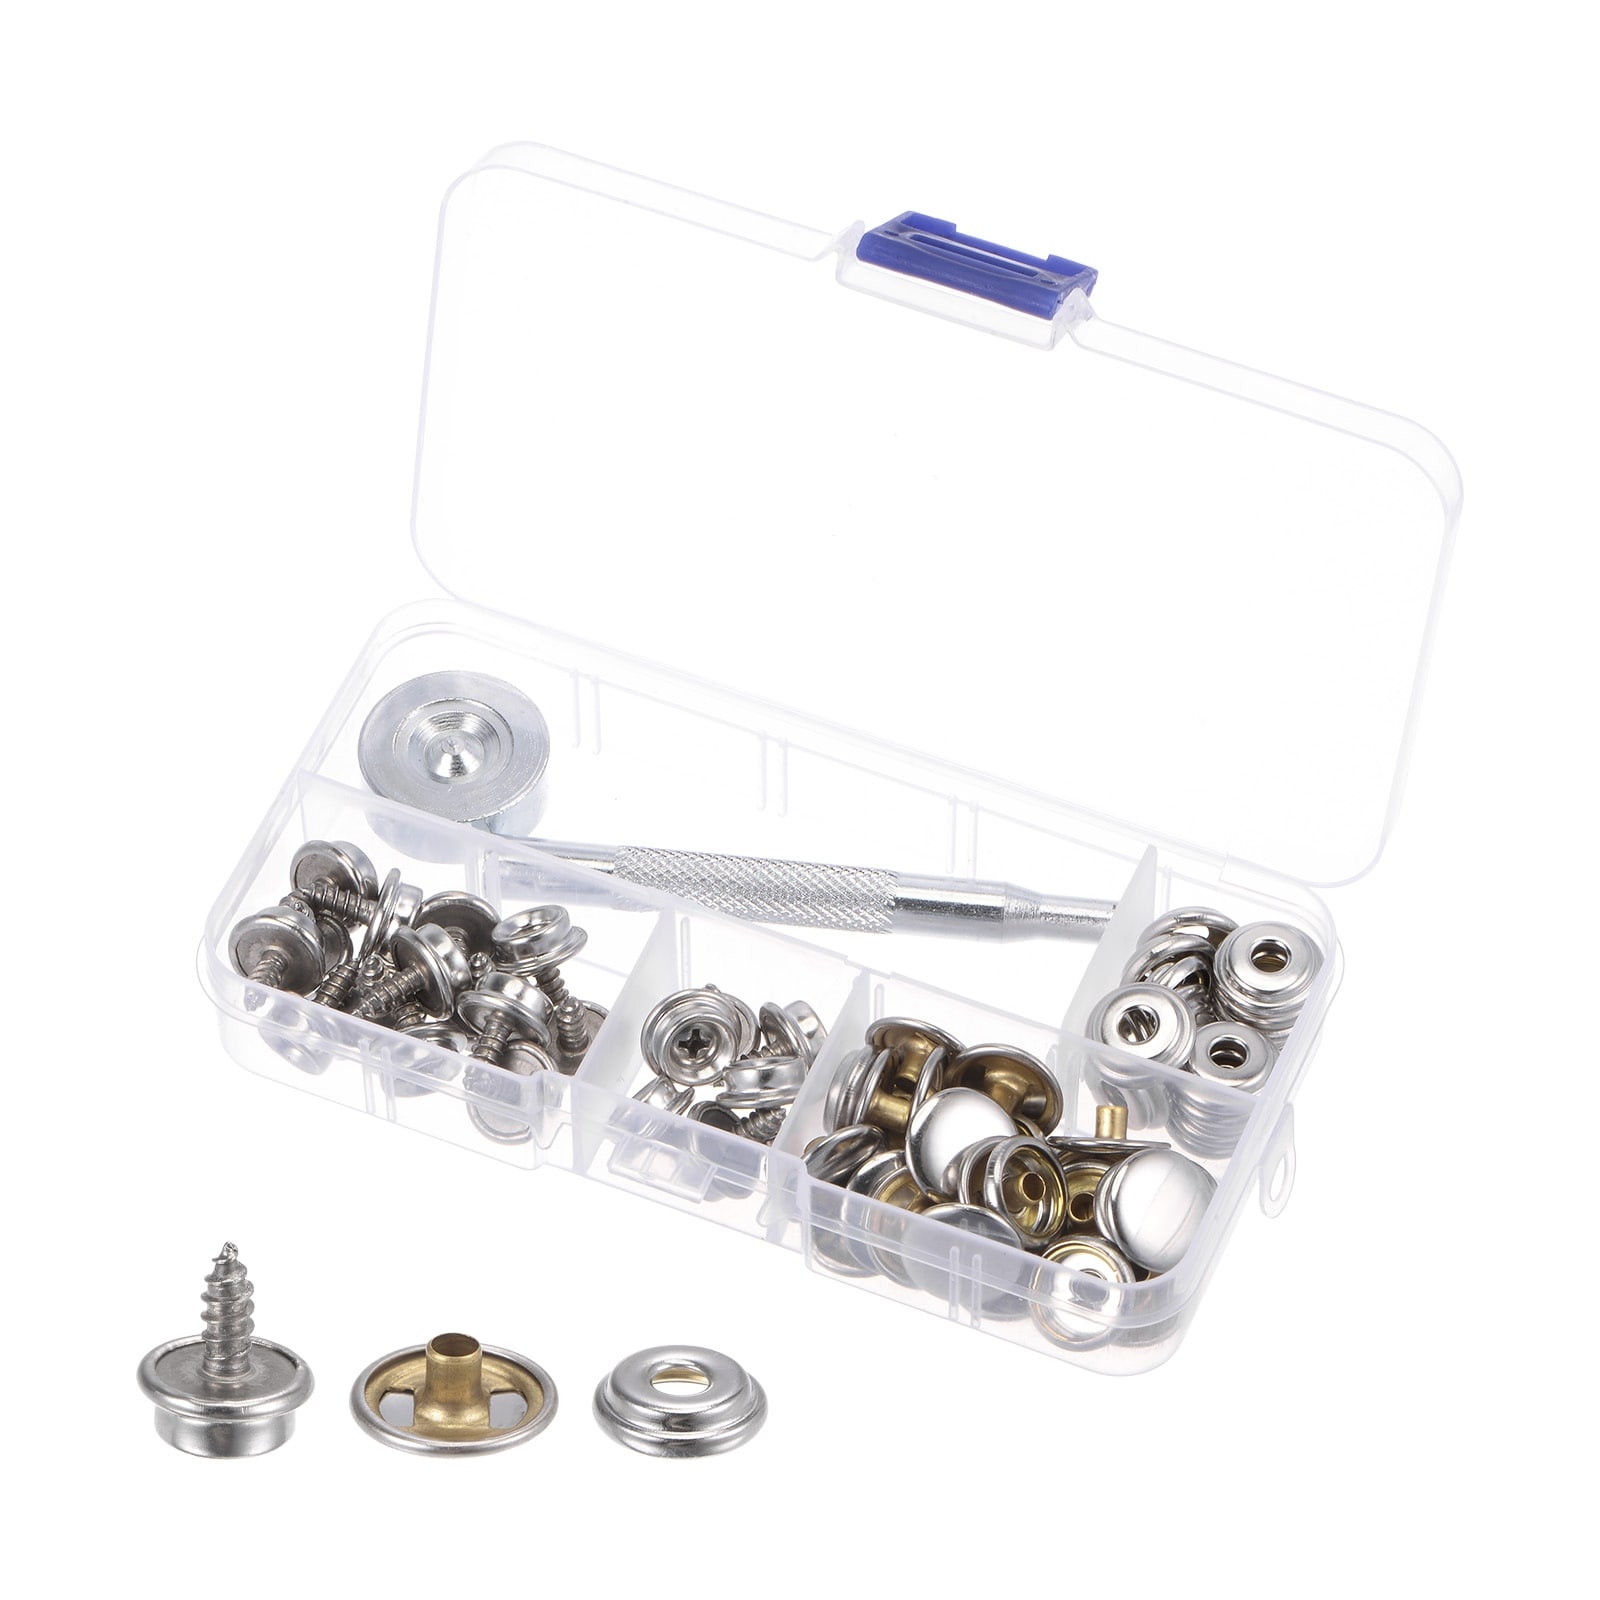 Unique Bargains 20 Sets Stainless Screw Snap Kit 10mm Copper Snaps Button with Tool, Silver Tone - Silver Tone